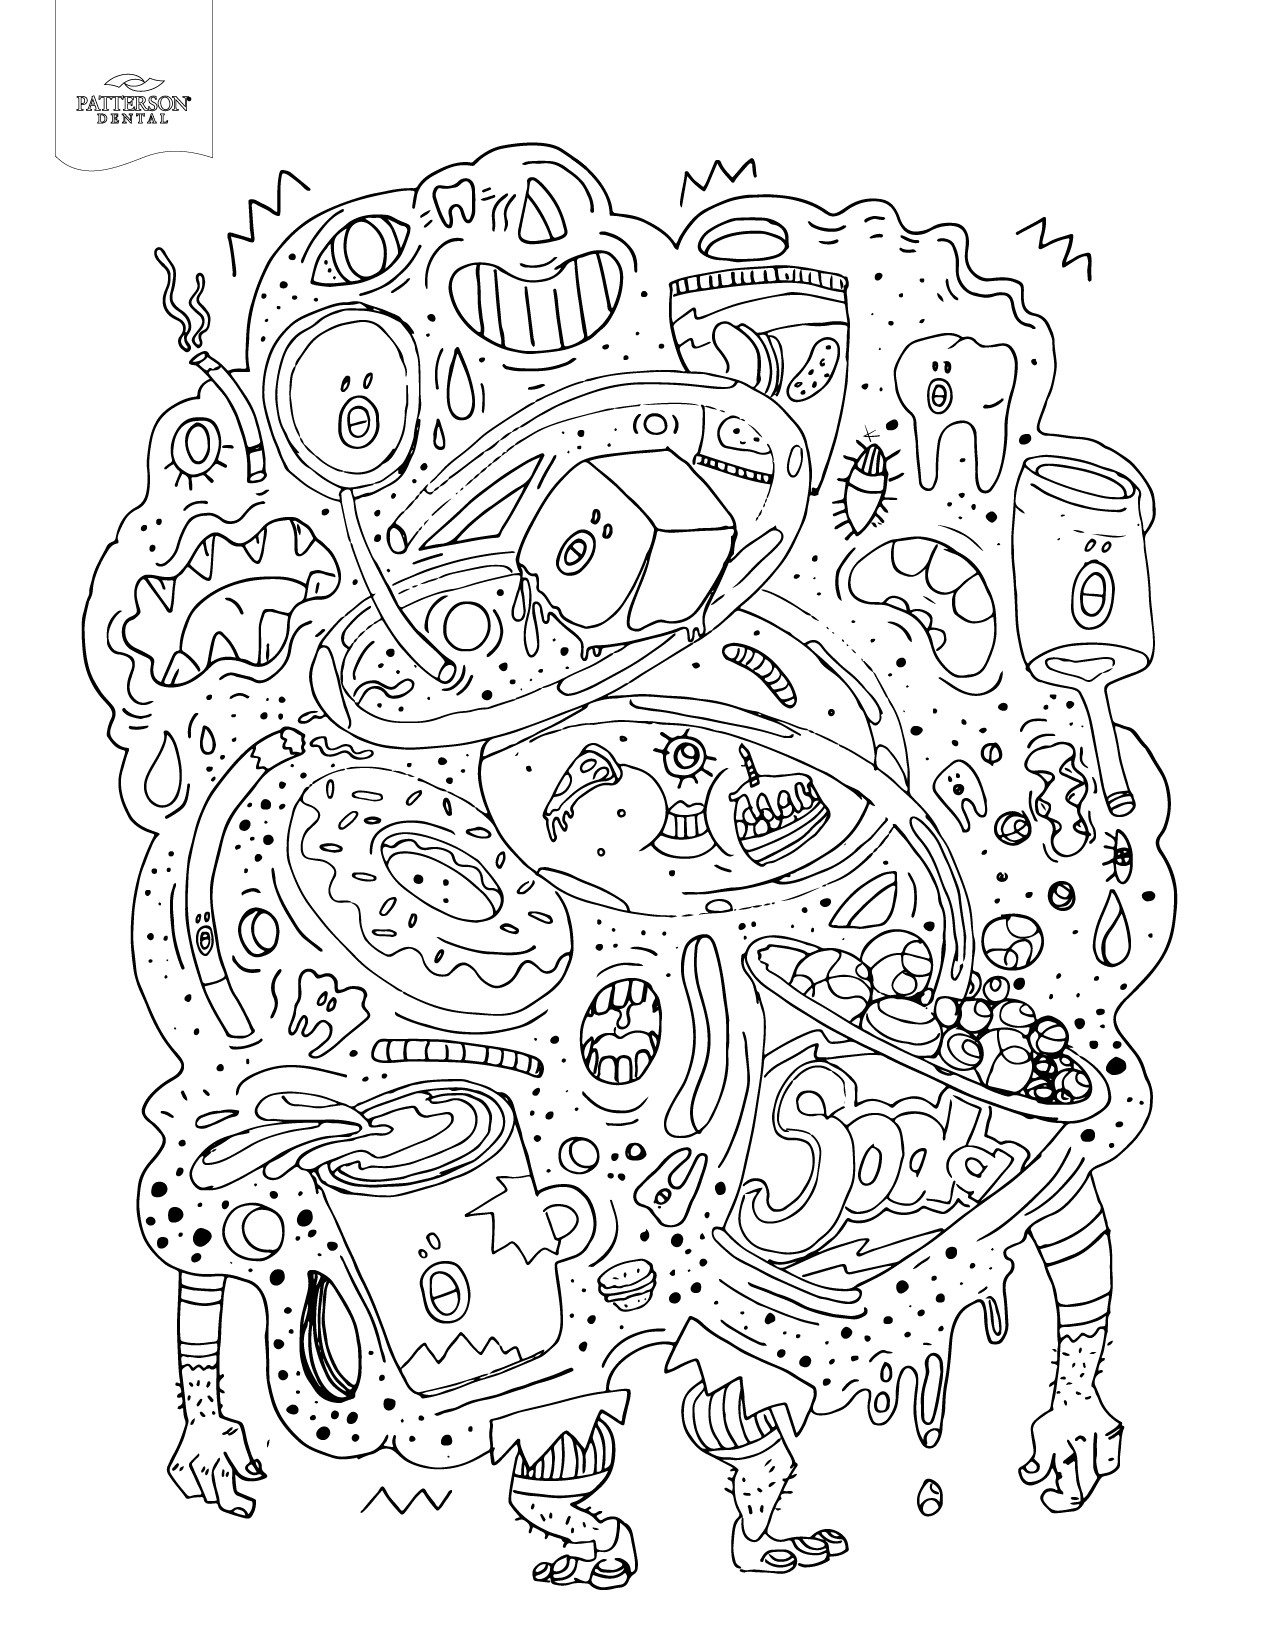 Adult Food Coloring Pages
 10 Toothy Adult Coloring Pages [Printable] f The Cusp